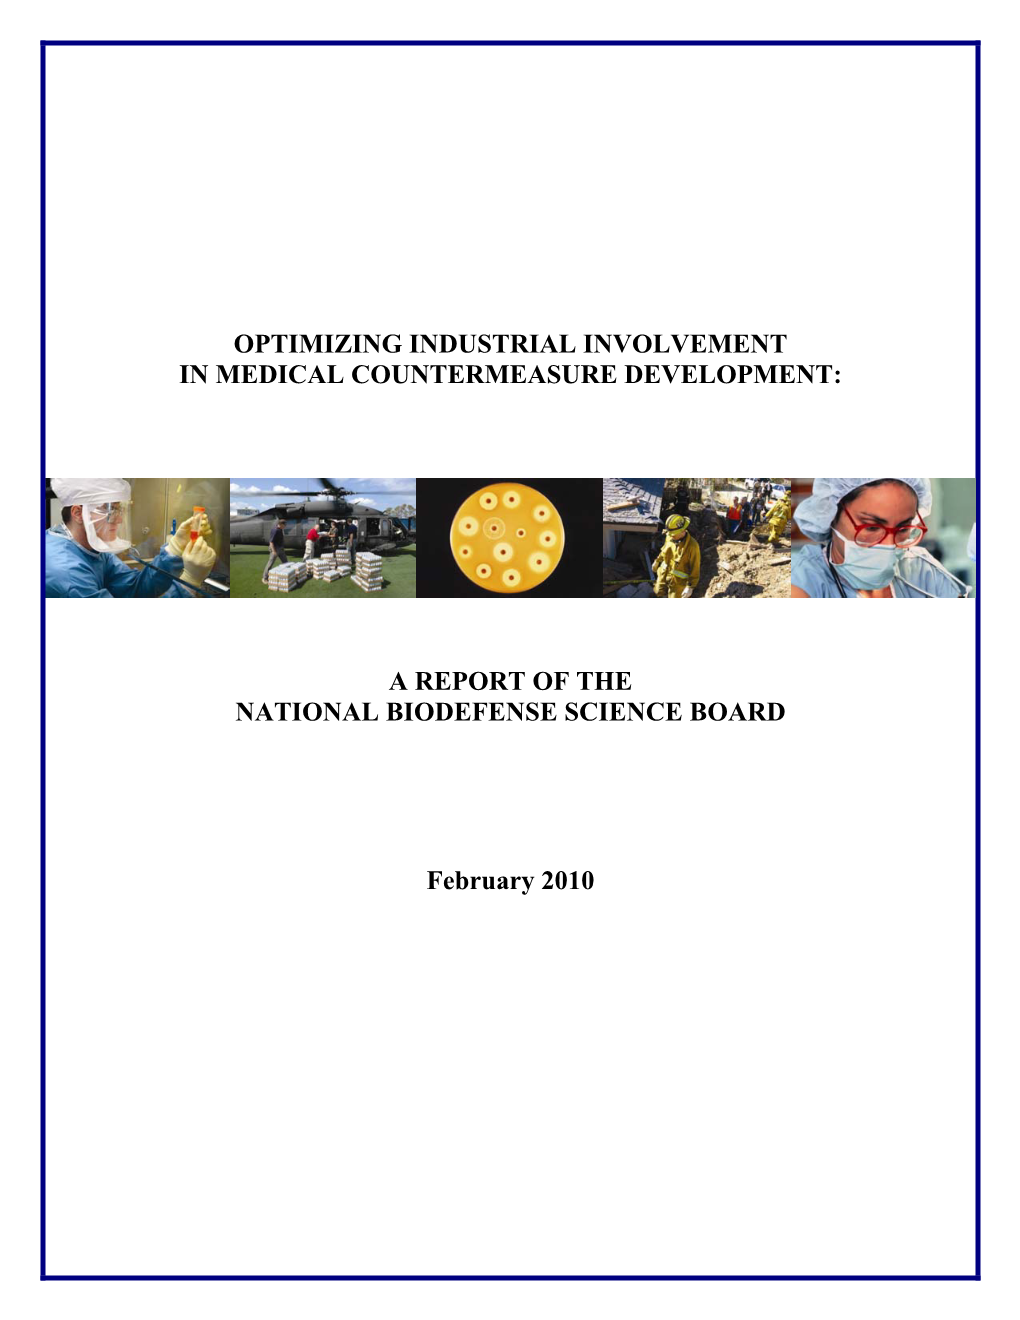 Optimizing Industrial Involvement in Medical Countermeasure (MCM) Development: a Report of the National Biodefense Science Board (NBSB)